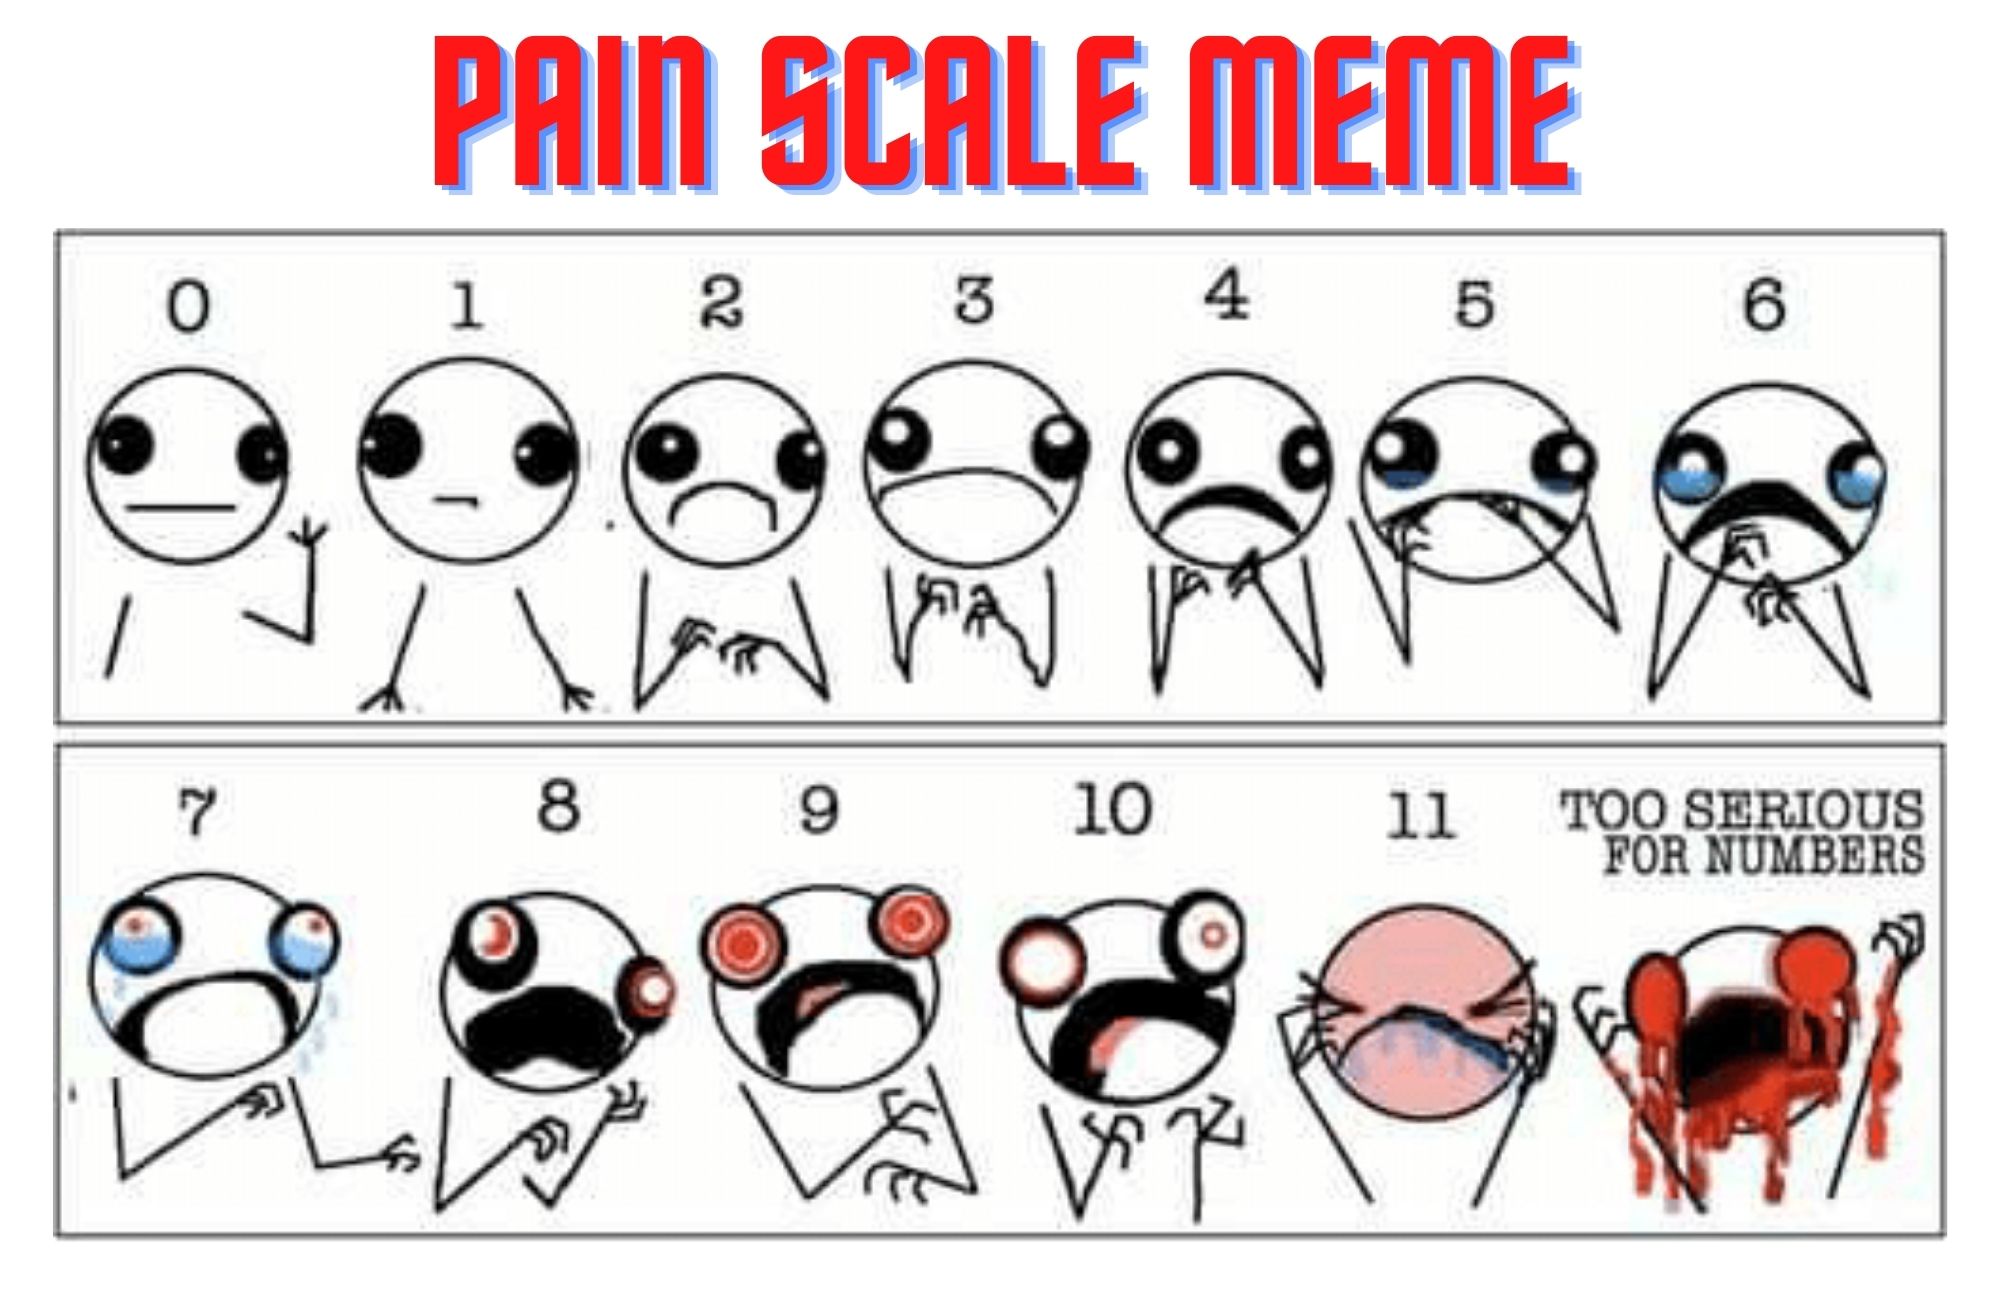 Pain Scale Meme - How Severe Is Your Pain On This Hilarious Meme?